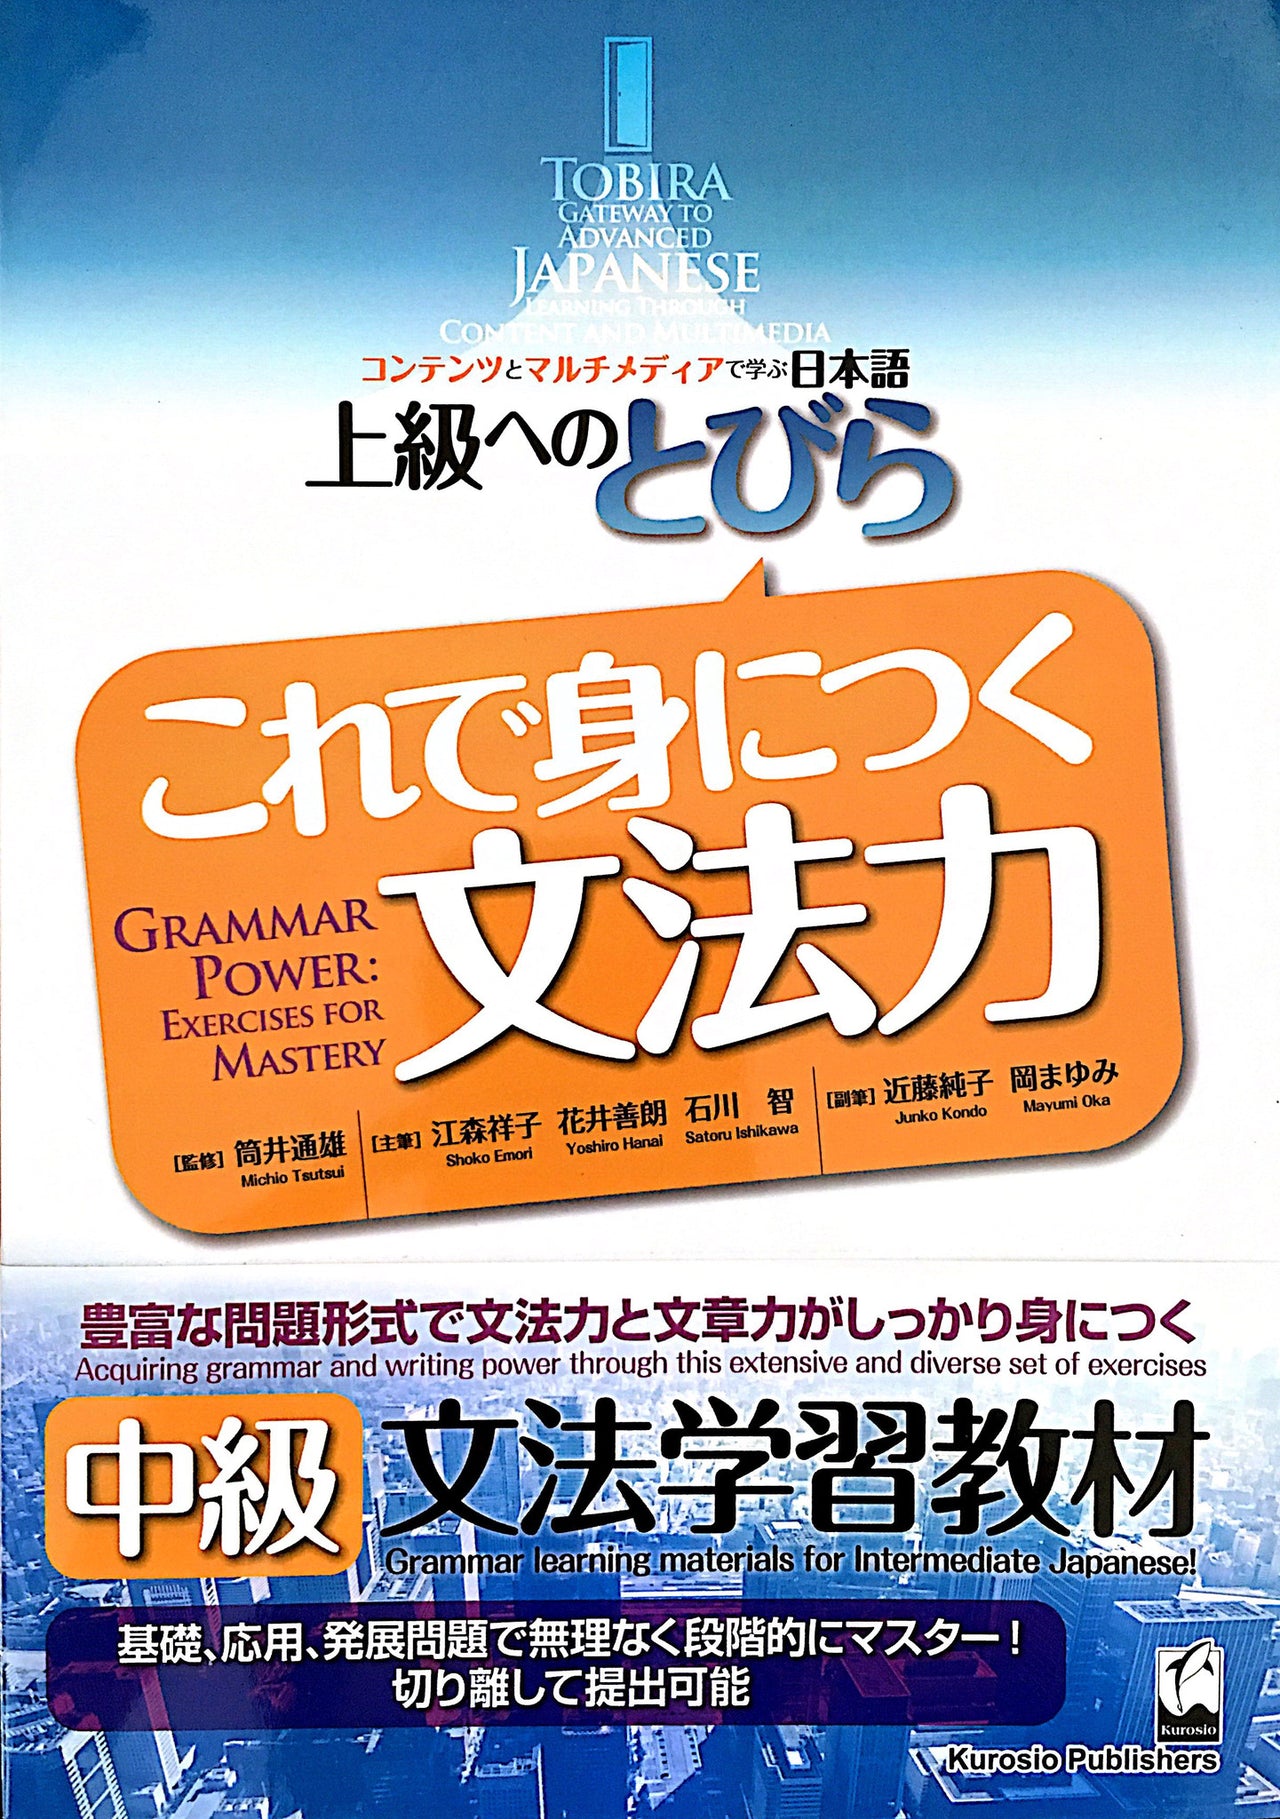 Tobira Grammar Power: Exercises for Mastery - The Japan Shop